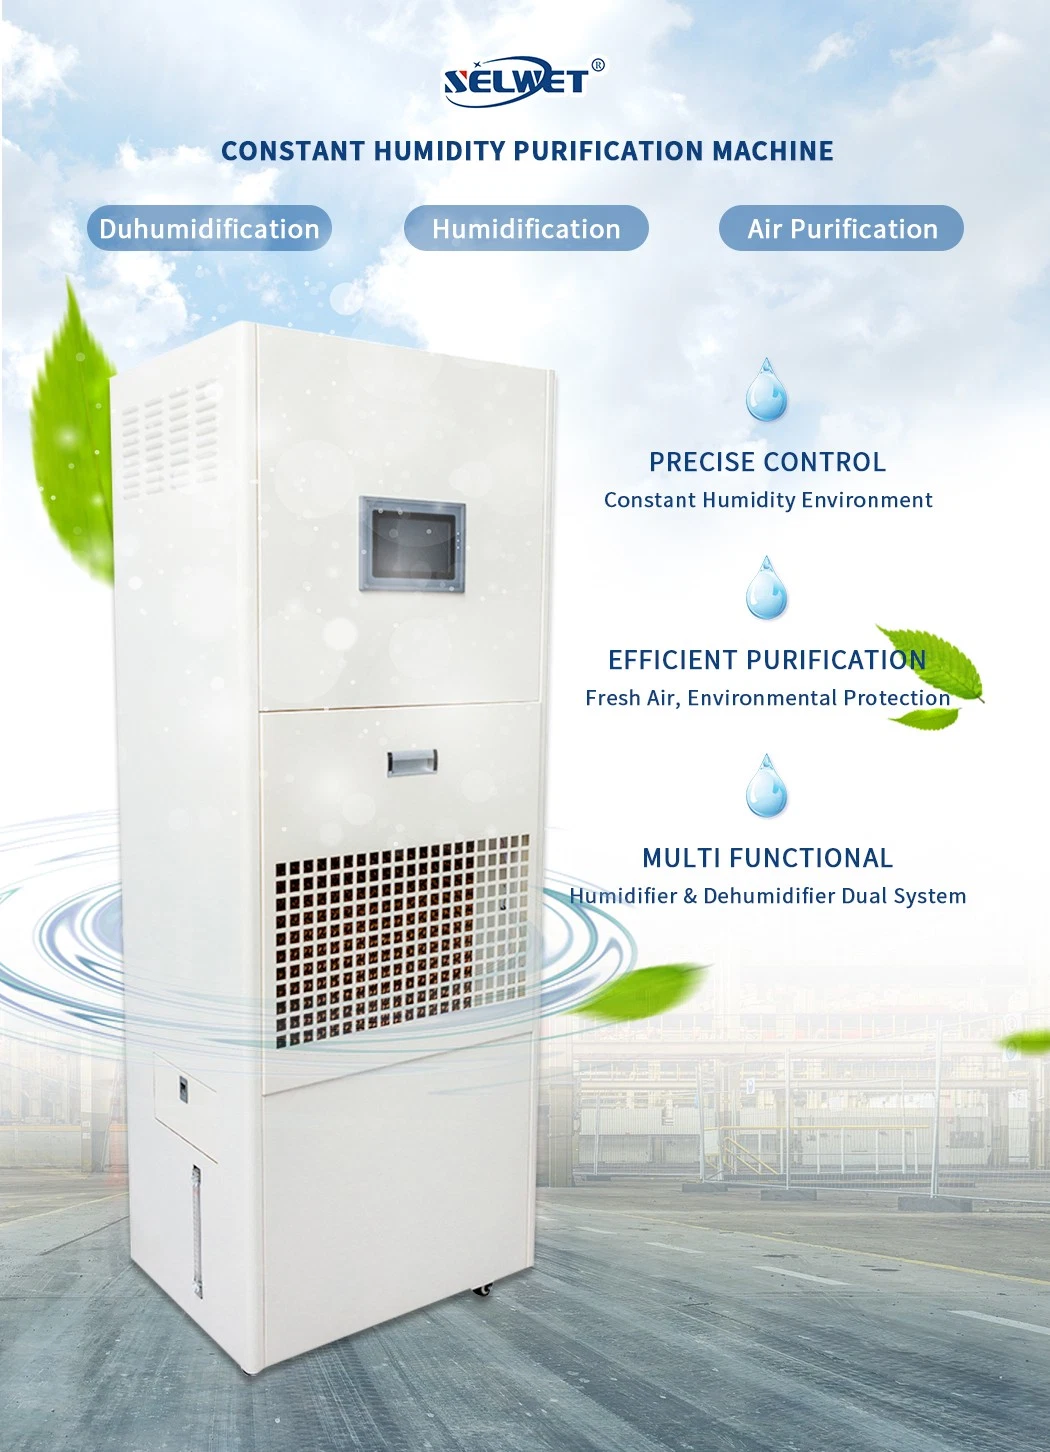 Silent Rotor Compressor Automatic Defrosting Multi Function Air Purification Humidification Dehumidifier